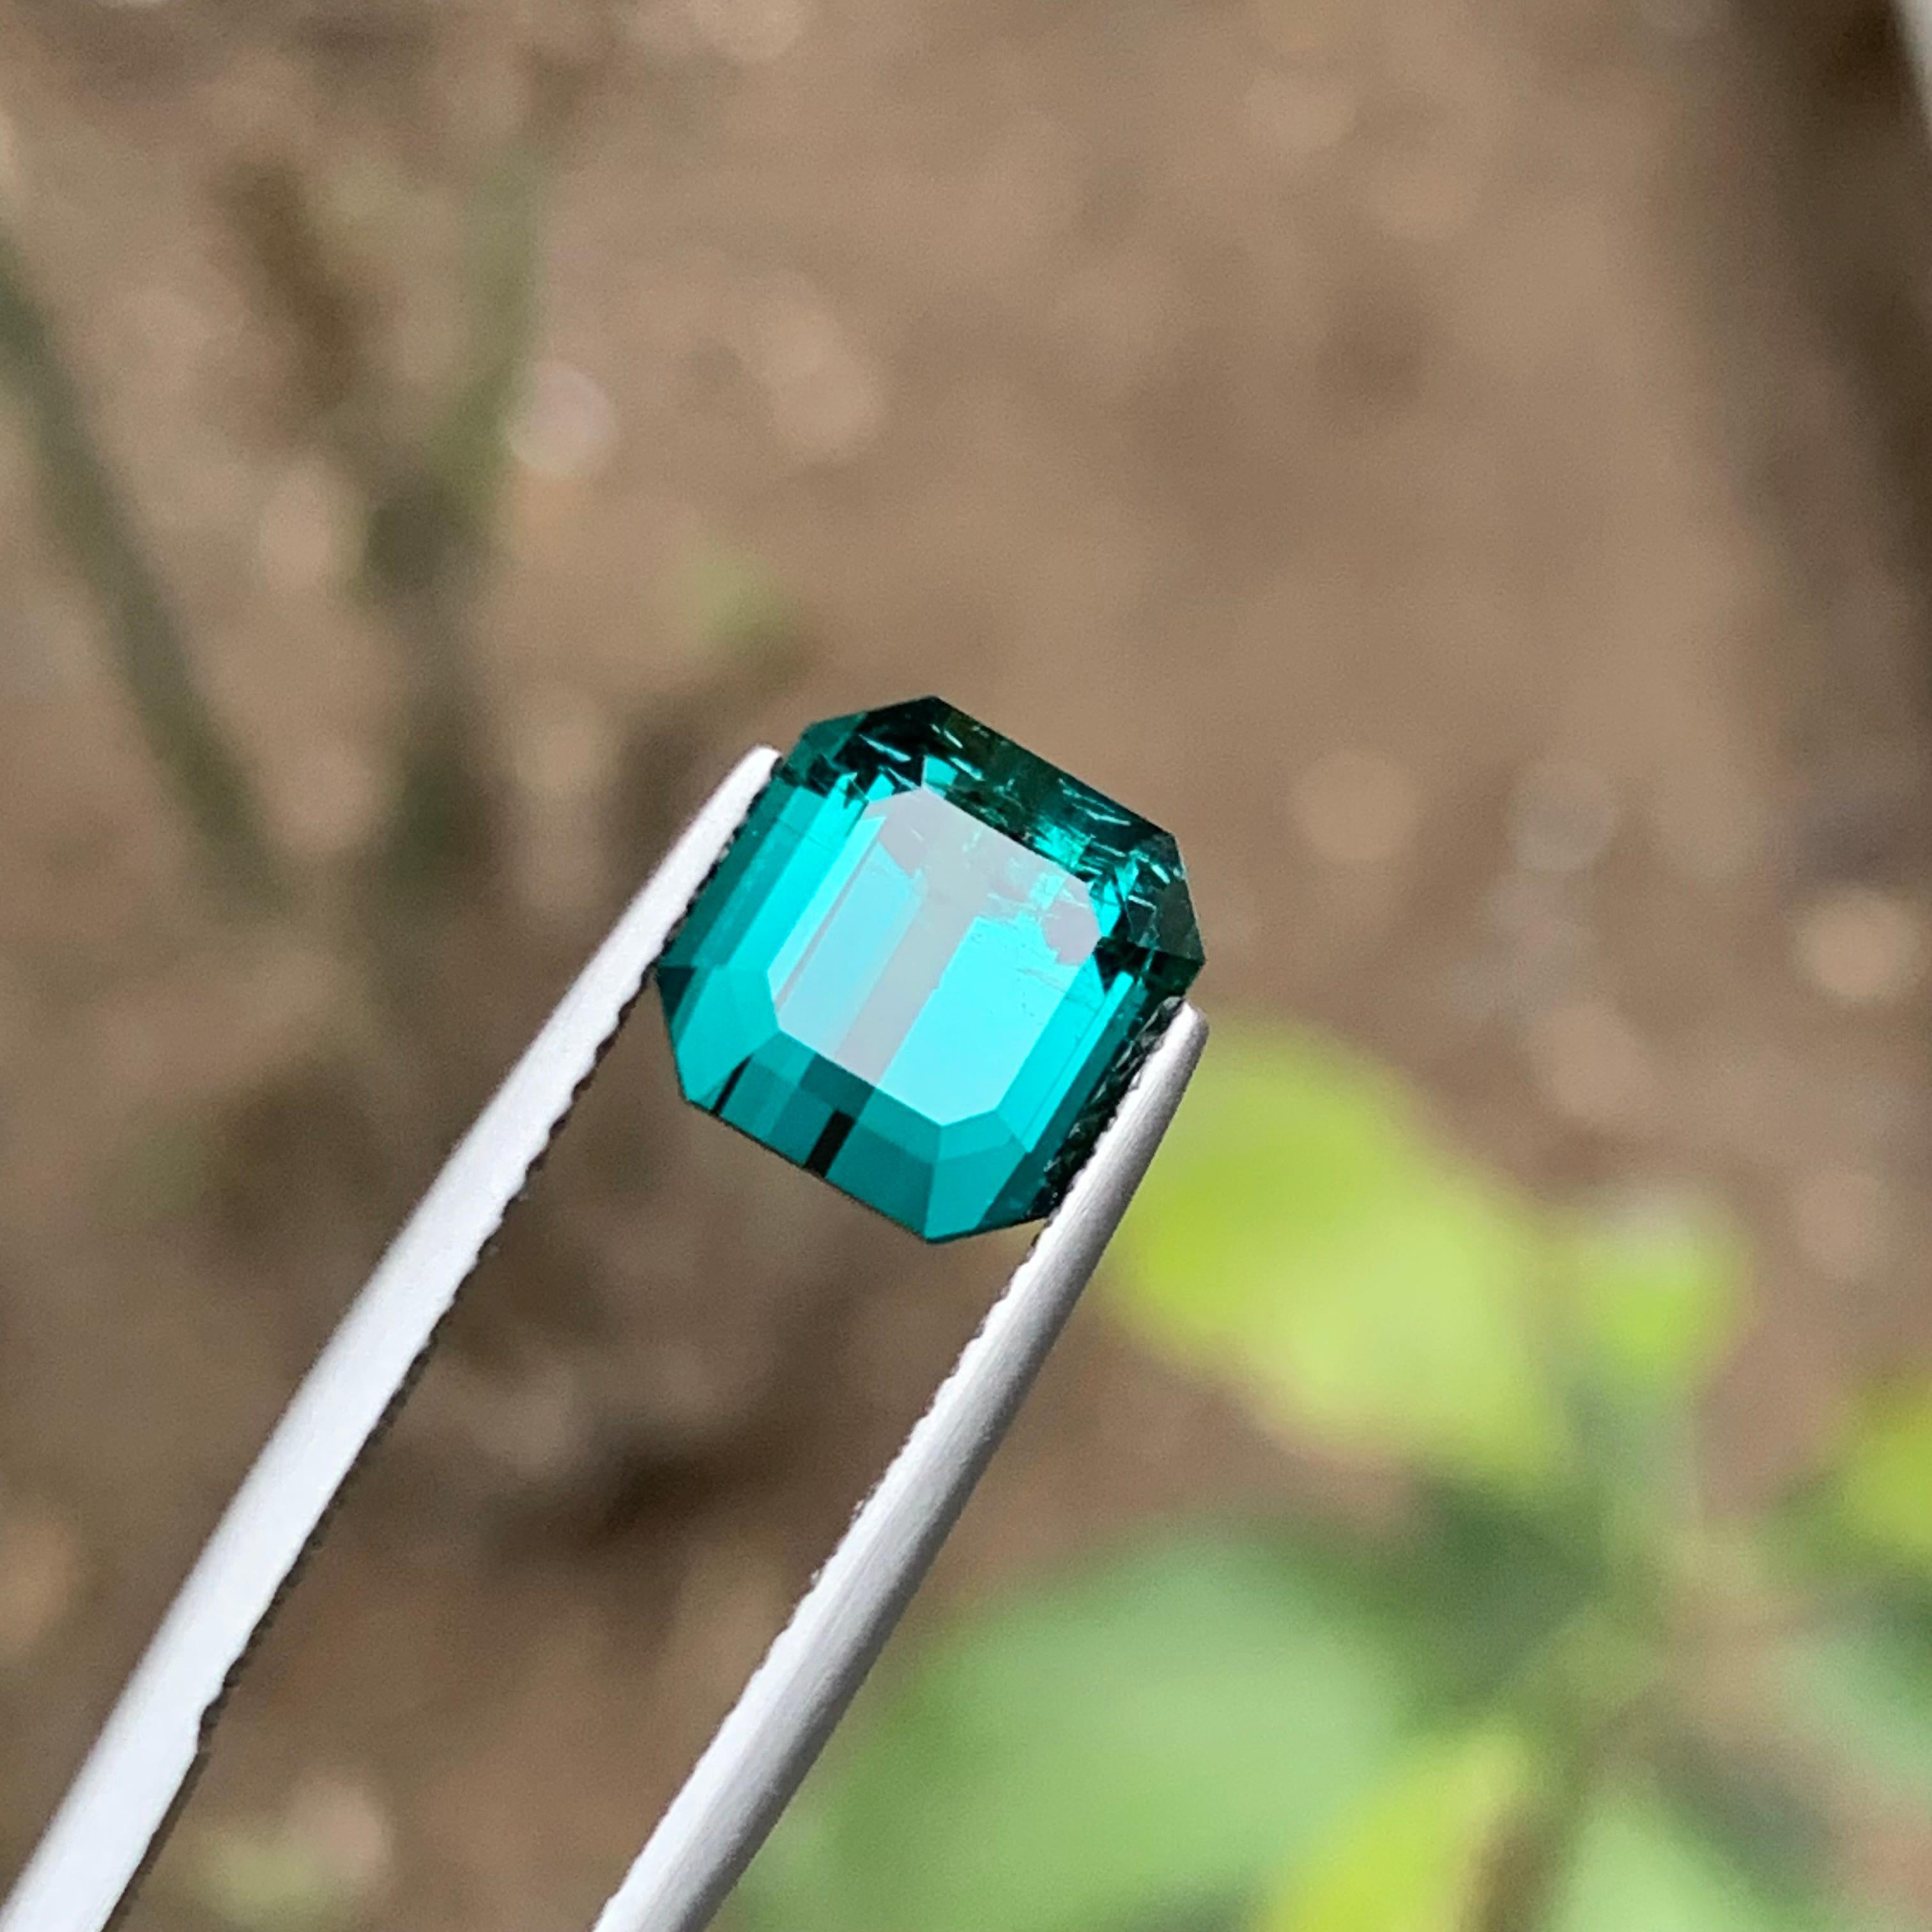 Rare Vibrant Lagoon Blue Natural Tourmaline Gemstone 4.20Ct Emerald Cut for Ring For Sale 5